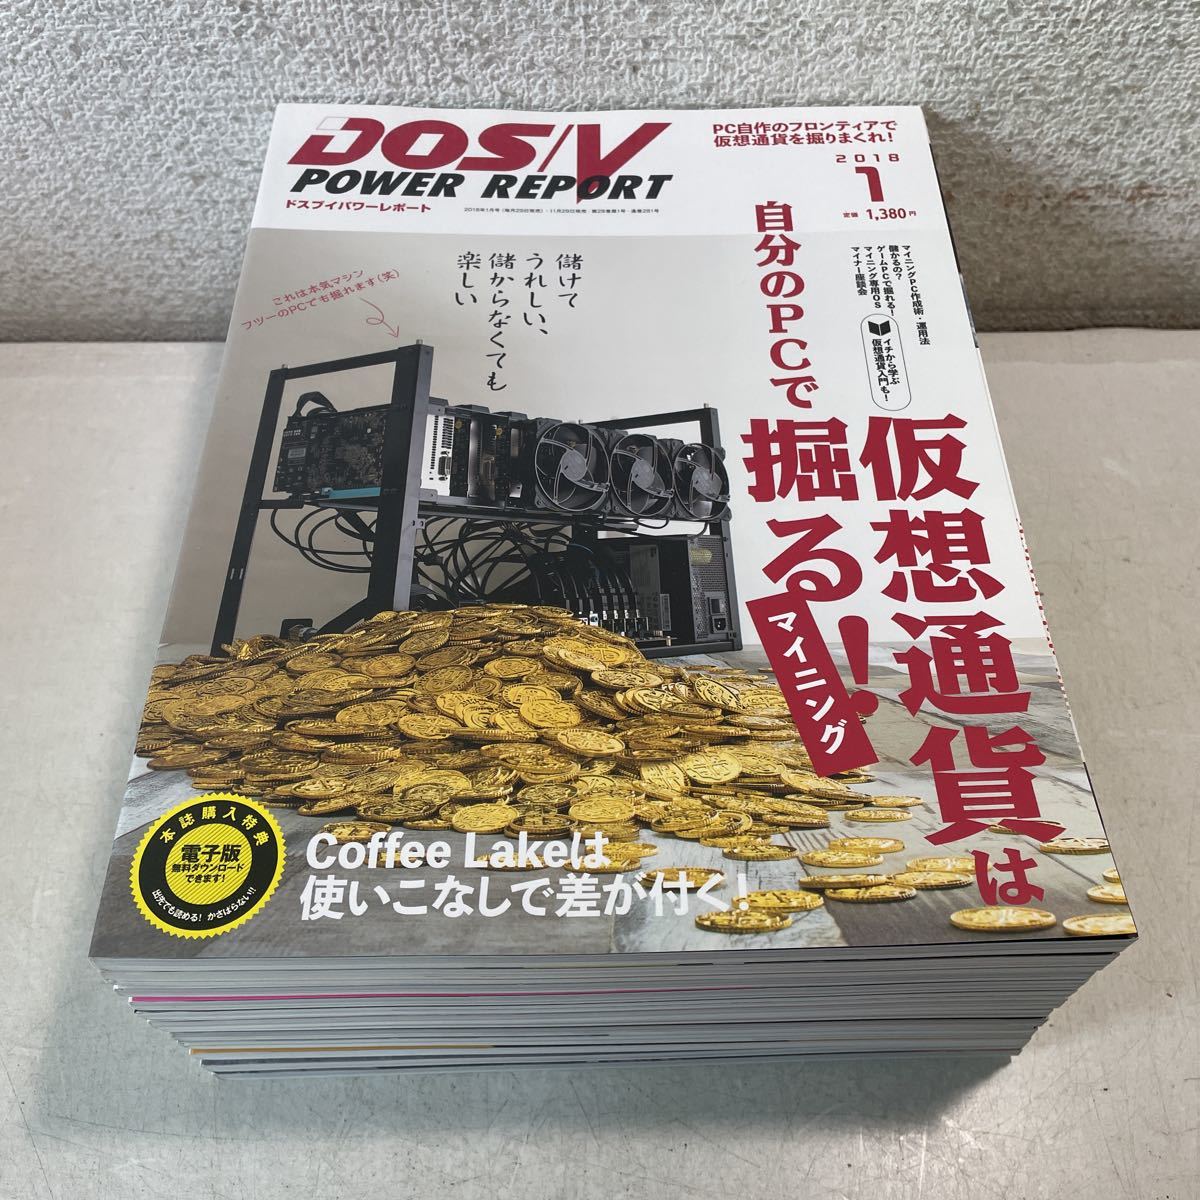 230210★U00★DOS/V POWER REPORT ドスブイパワーレポート 2018年1月号〜12月号 揃い12冊セット★パソコン誌_画像1